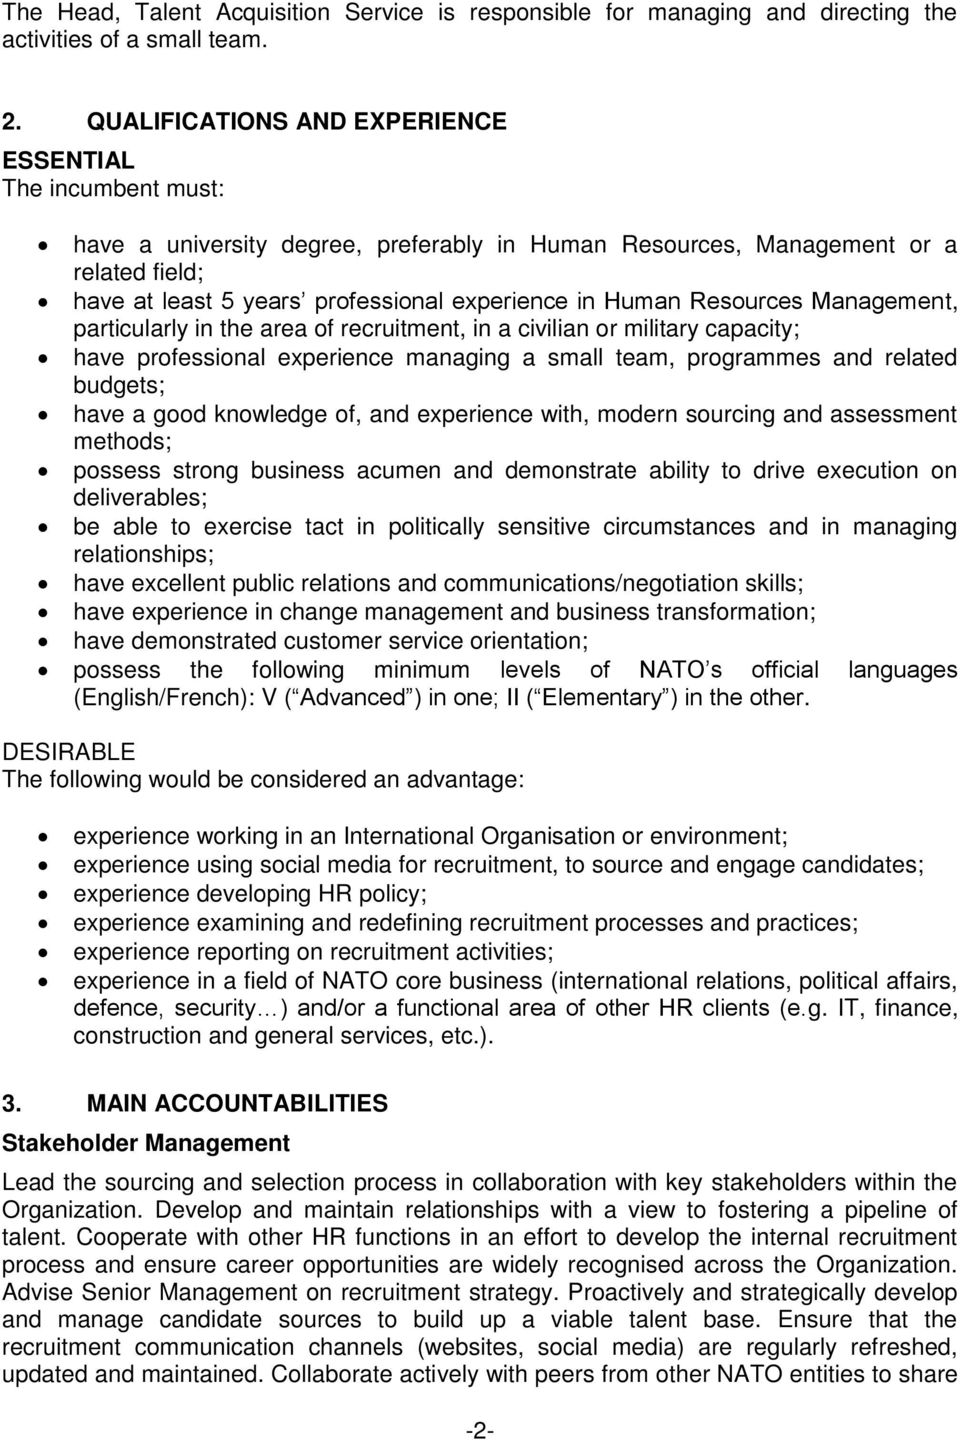 Human Resources Management, particularly in the area of recruitment, in a civilian or military capacity; have professional experience managing a small team, programmes and related budgets; have a